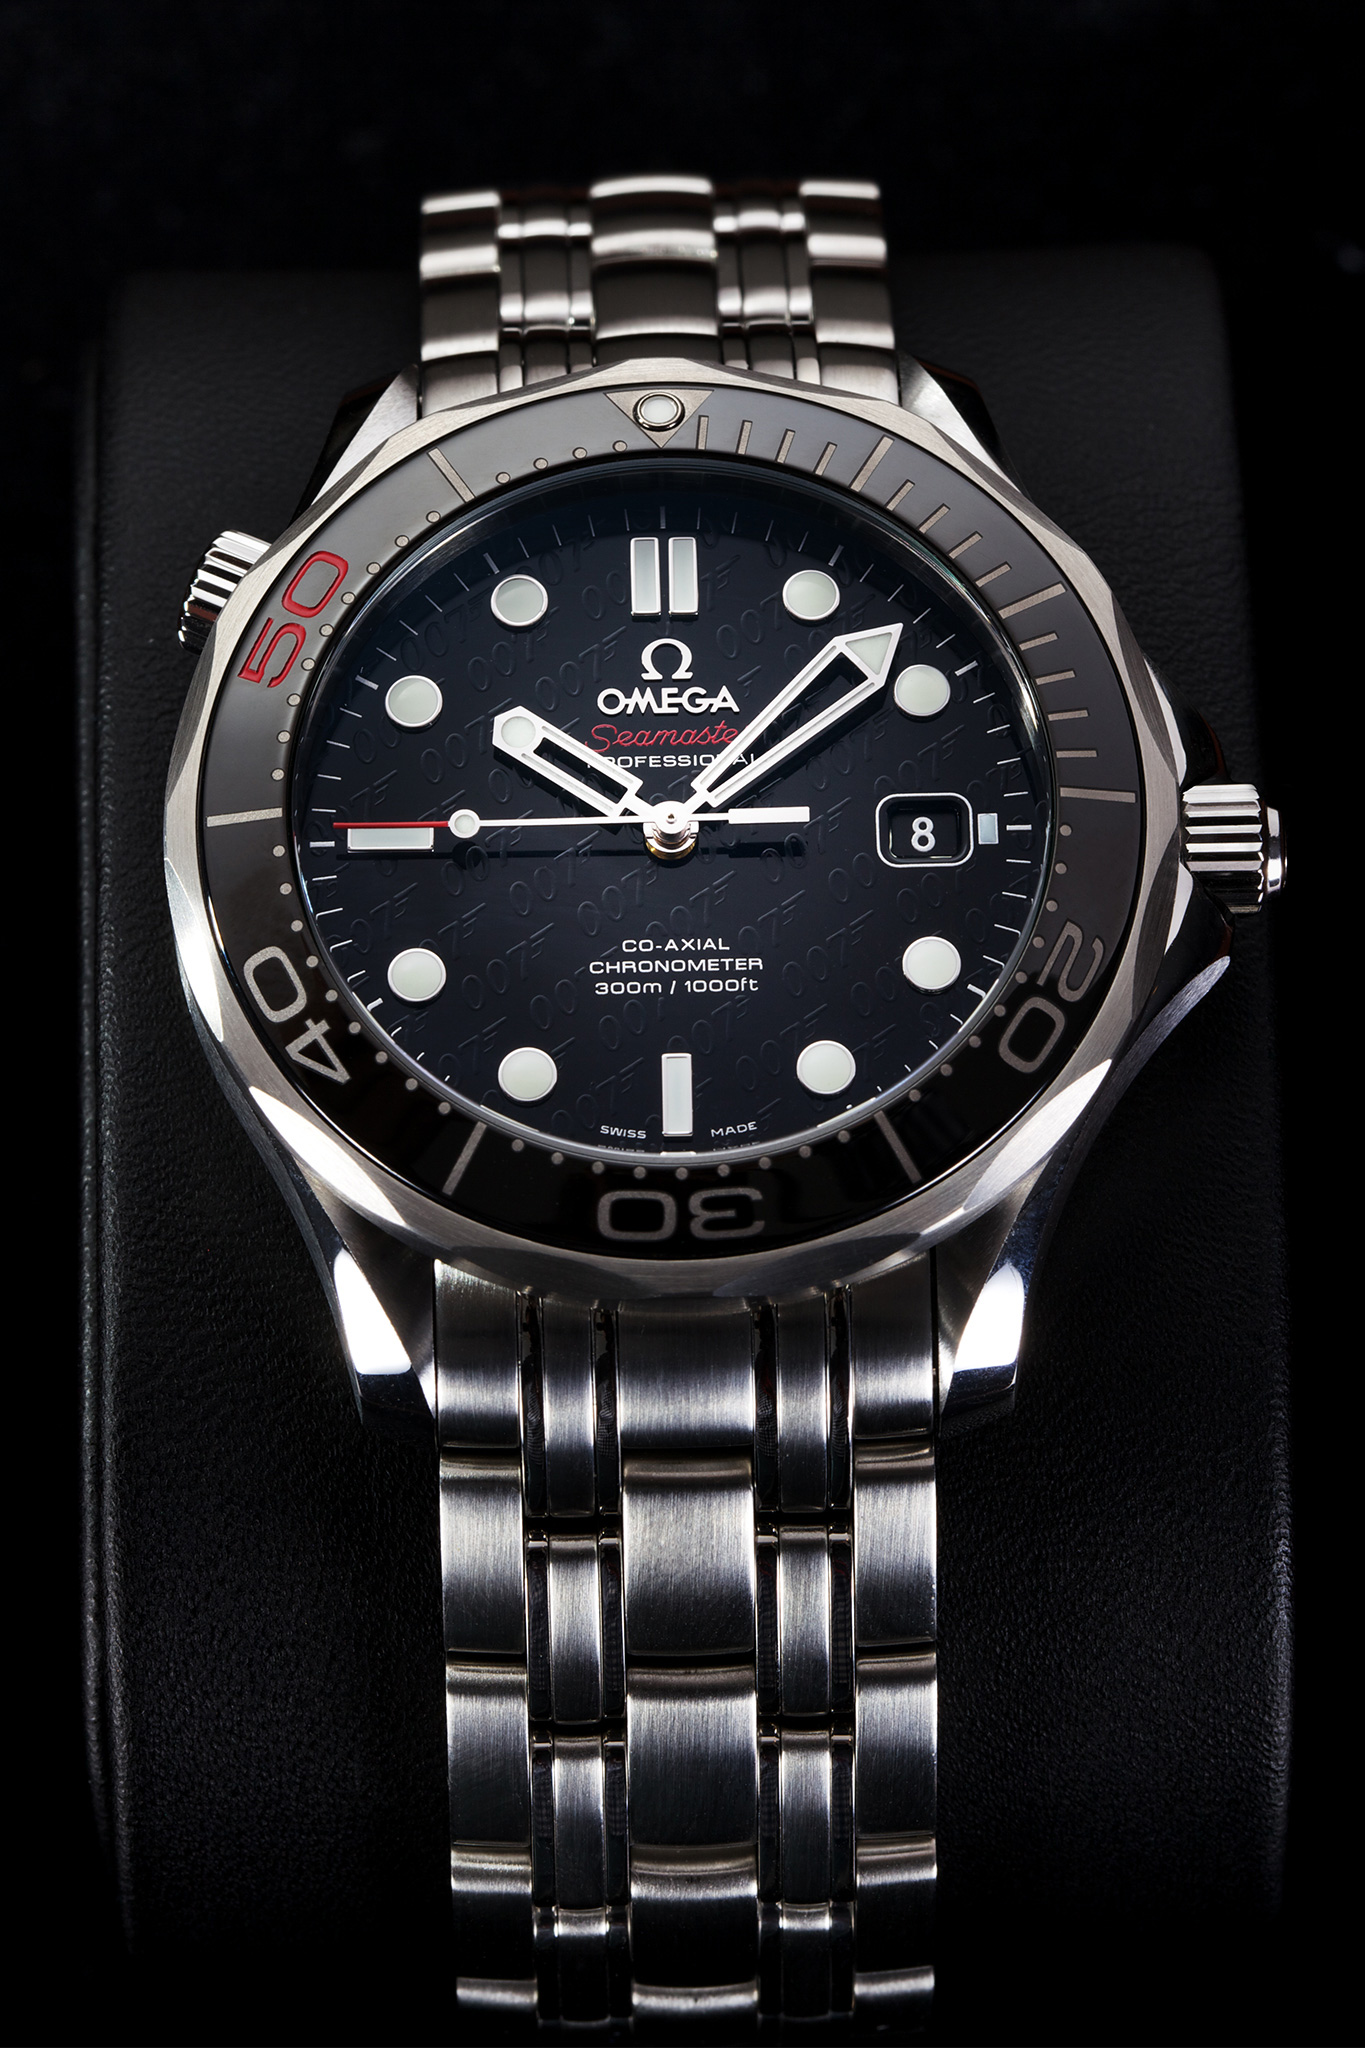 Omega James Bond 007 50th Anniversary Collector's Piece iW Magazine Mike Mellia